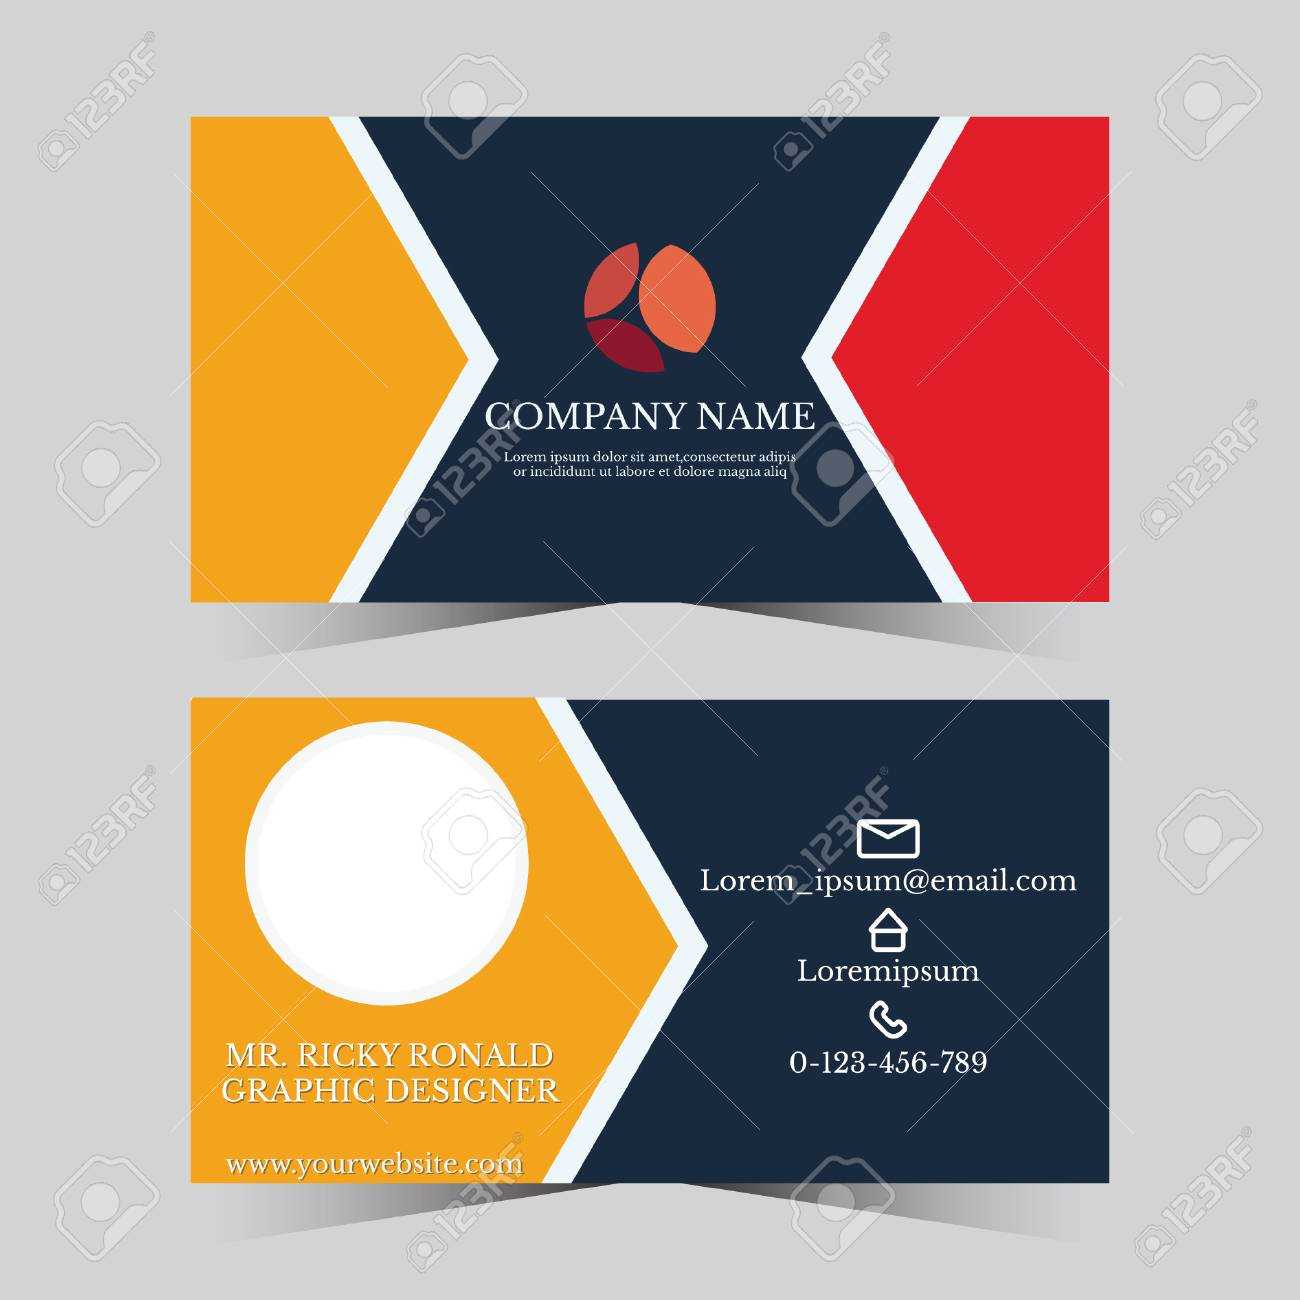 Calling Card Template For Business Man With Geometric Design For Template For Calling Card